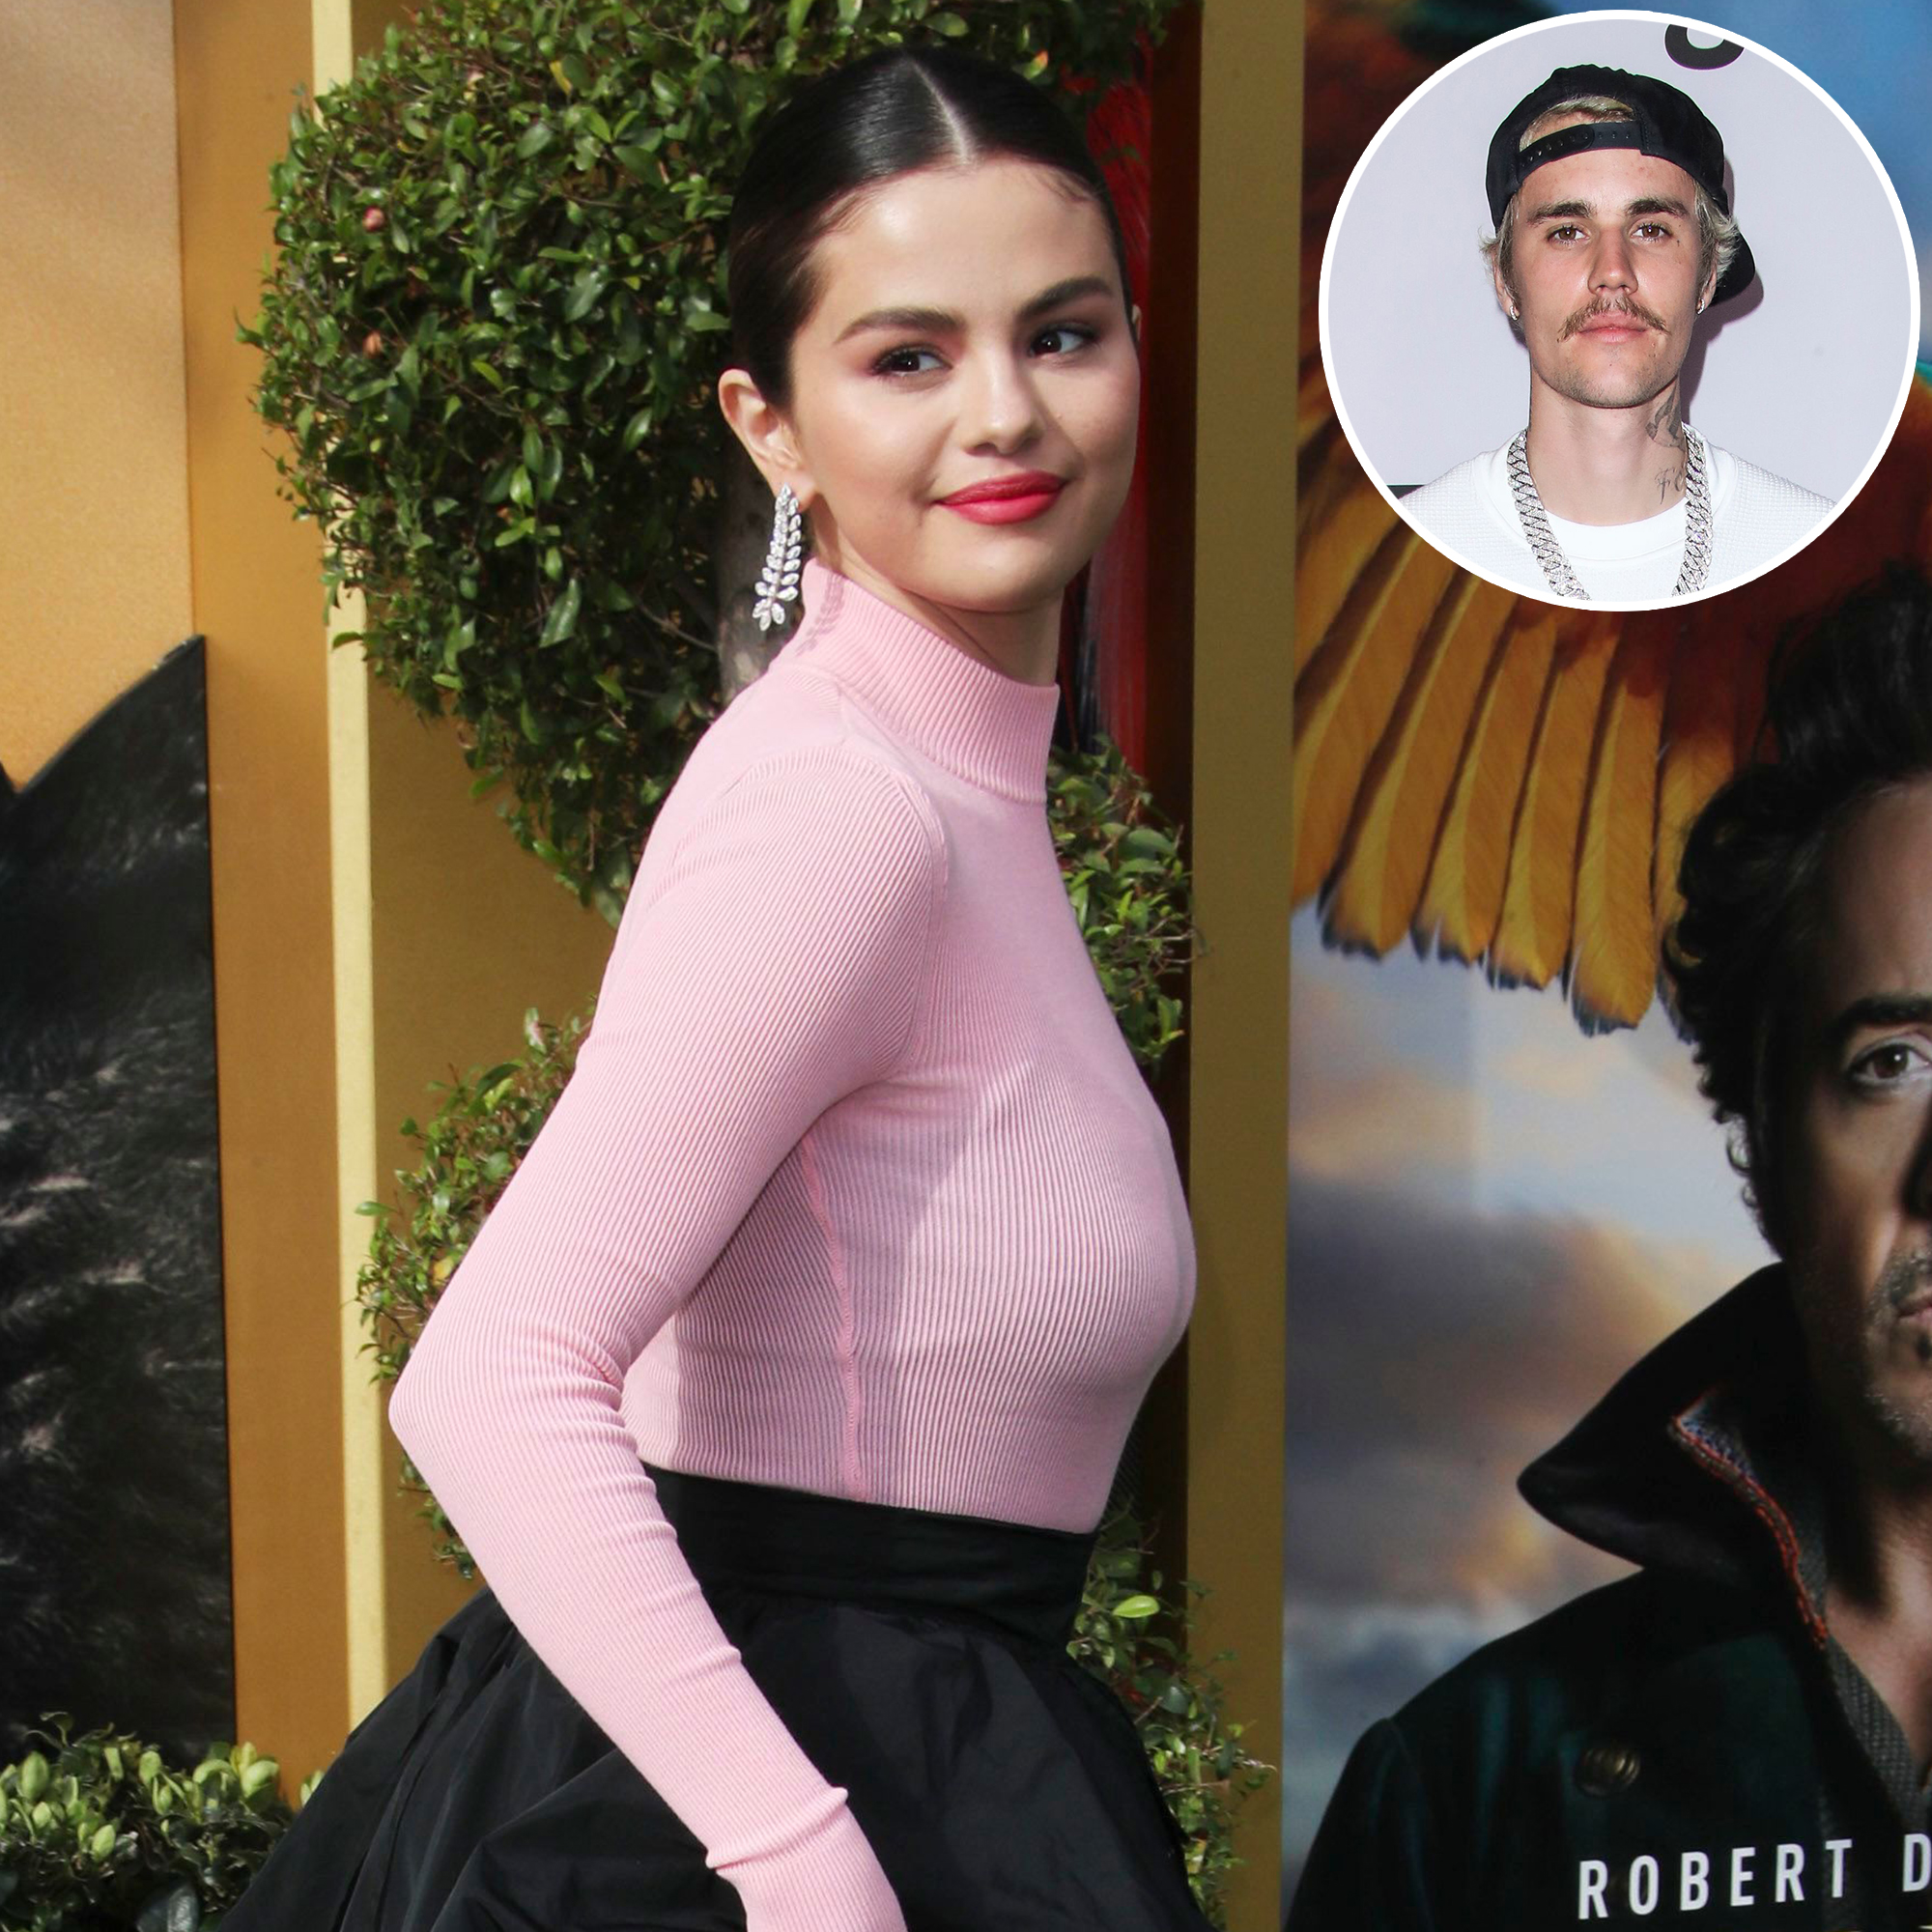 Selena Gomez Real - Selena Gomez 'Likes' and 'Unlikes' Justin Bieber Pictures on Instagram